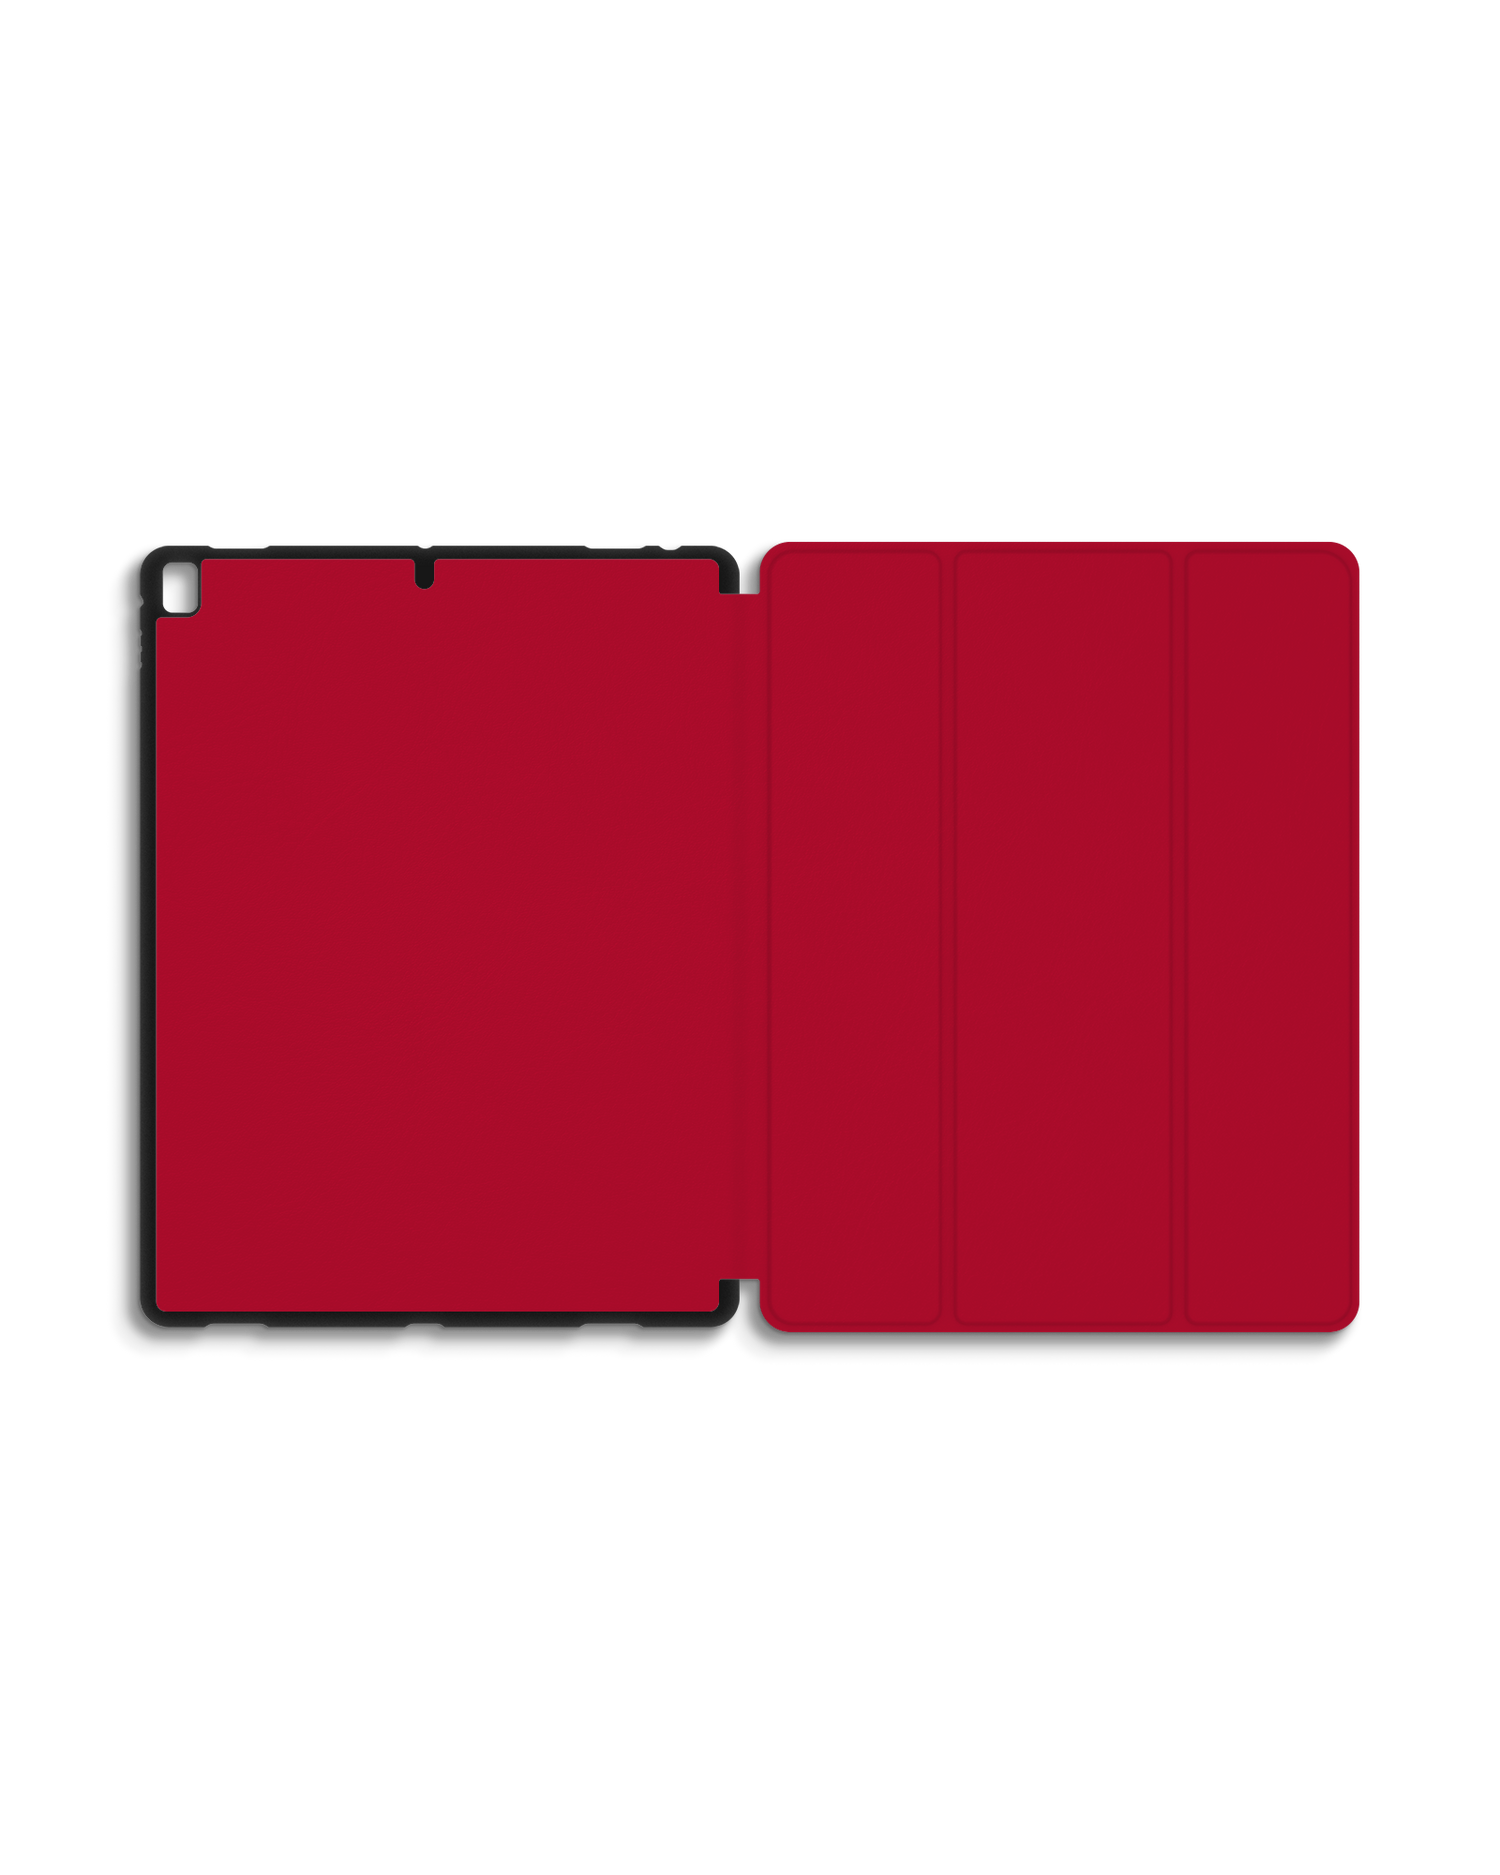 RED iPad Case with Pencil Holder for Apple iPad Pro 2 12.9